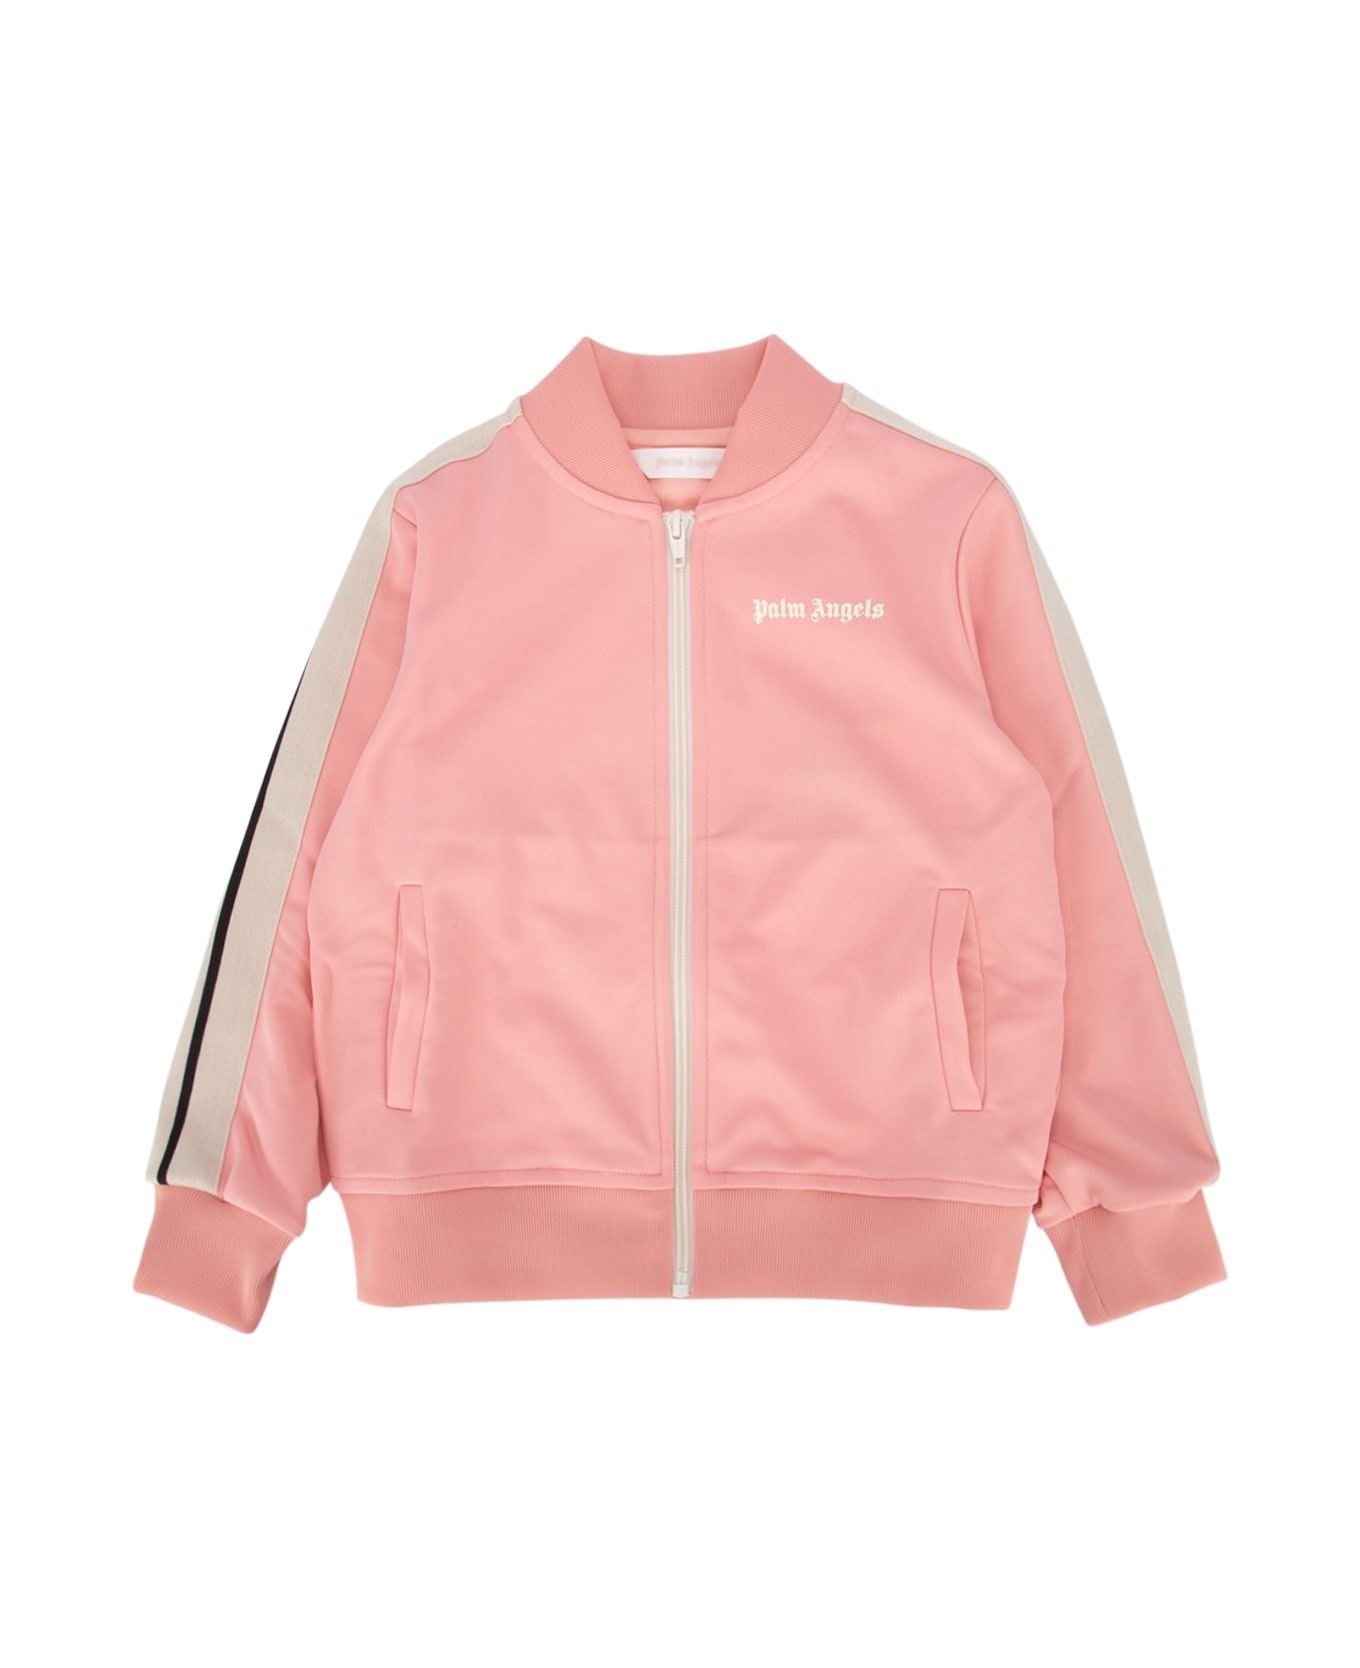 Palm Angels Giacca - PINKOFFWHITE コート＆ジャケット